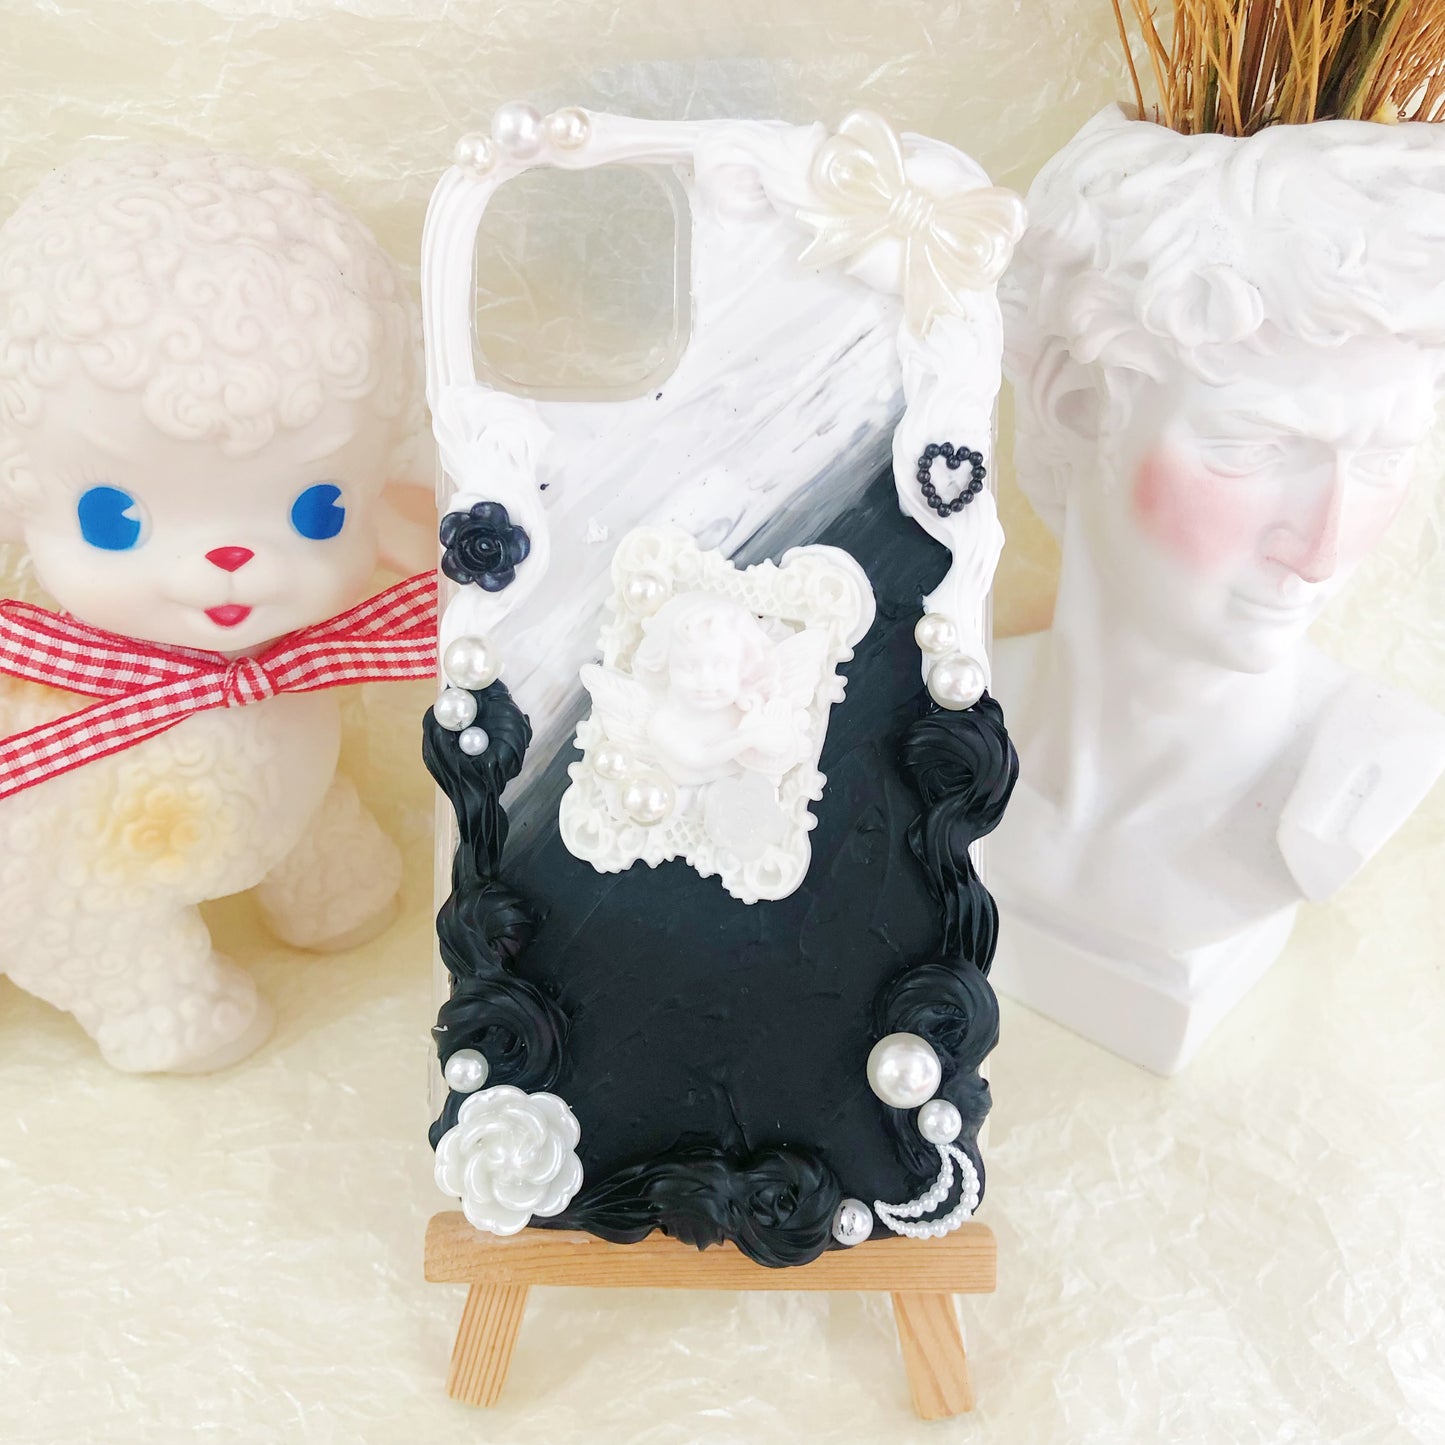 2 hours Decoden experience(奶油胶) It's just a booking link